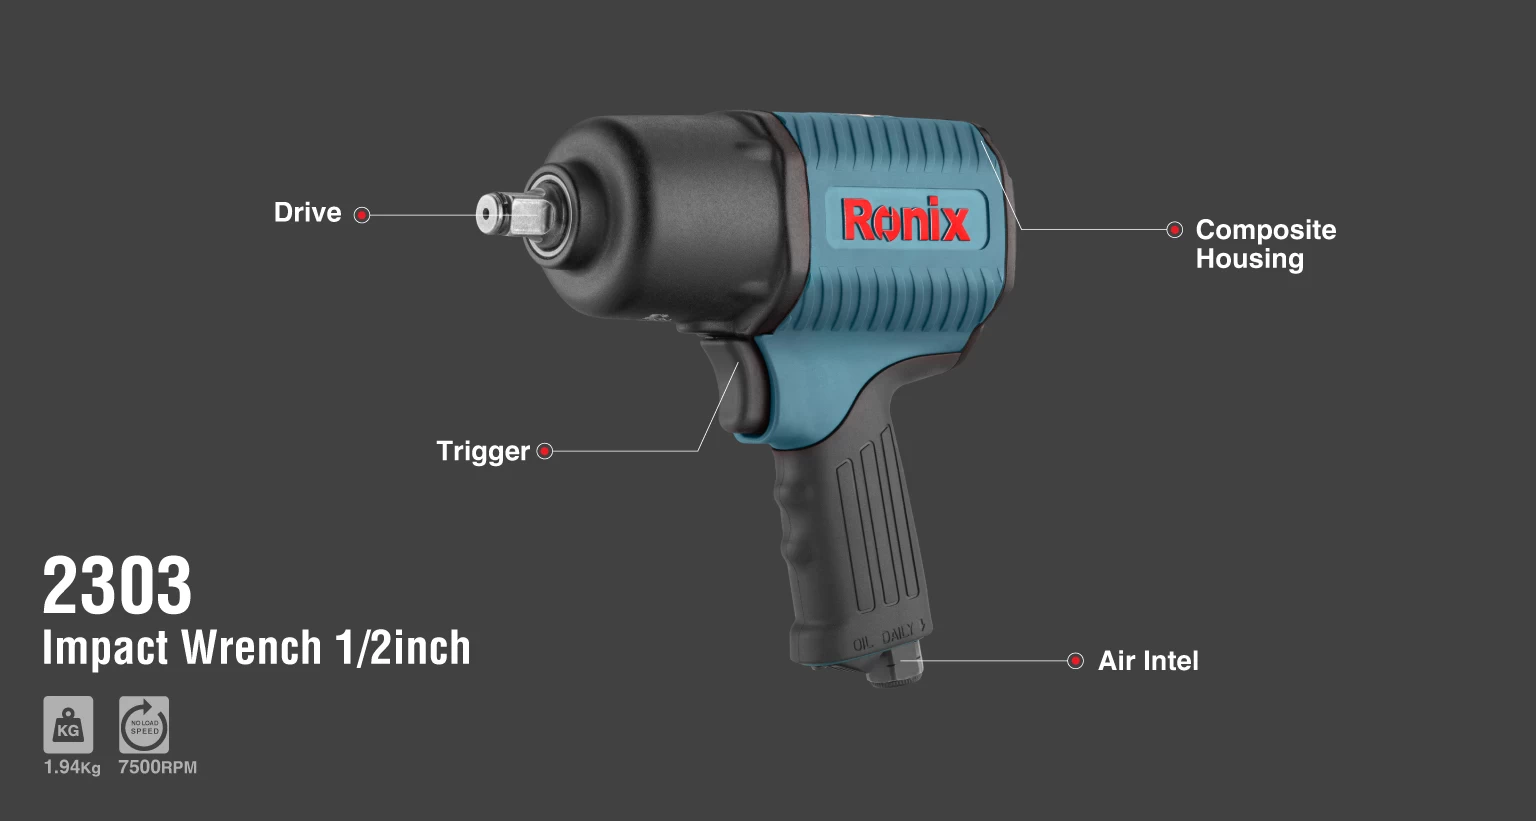 Composite Twin Hammer Air Impact Wrench-1/2 Inch_details